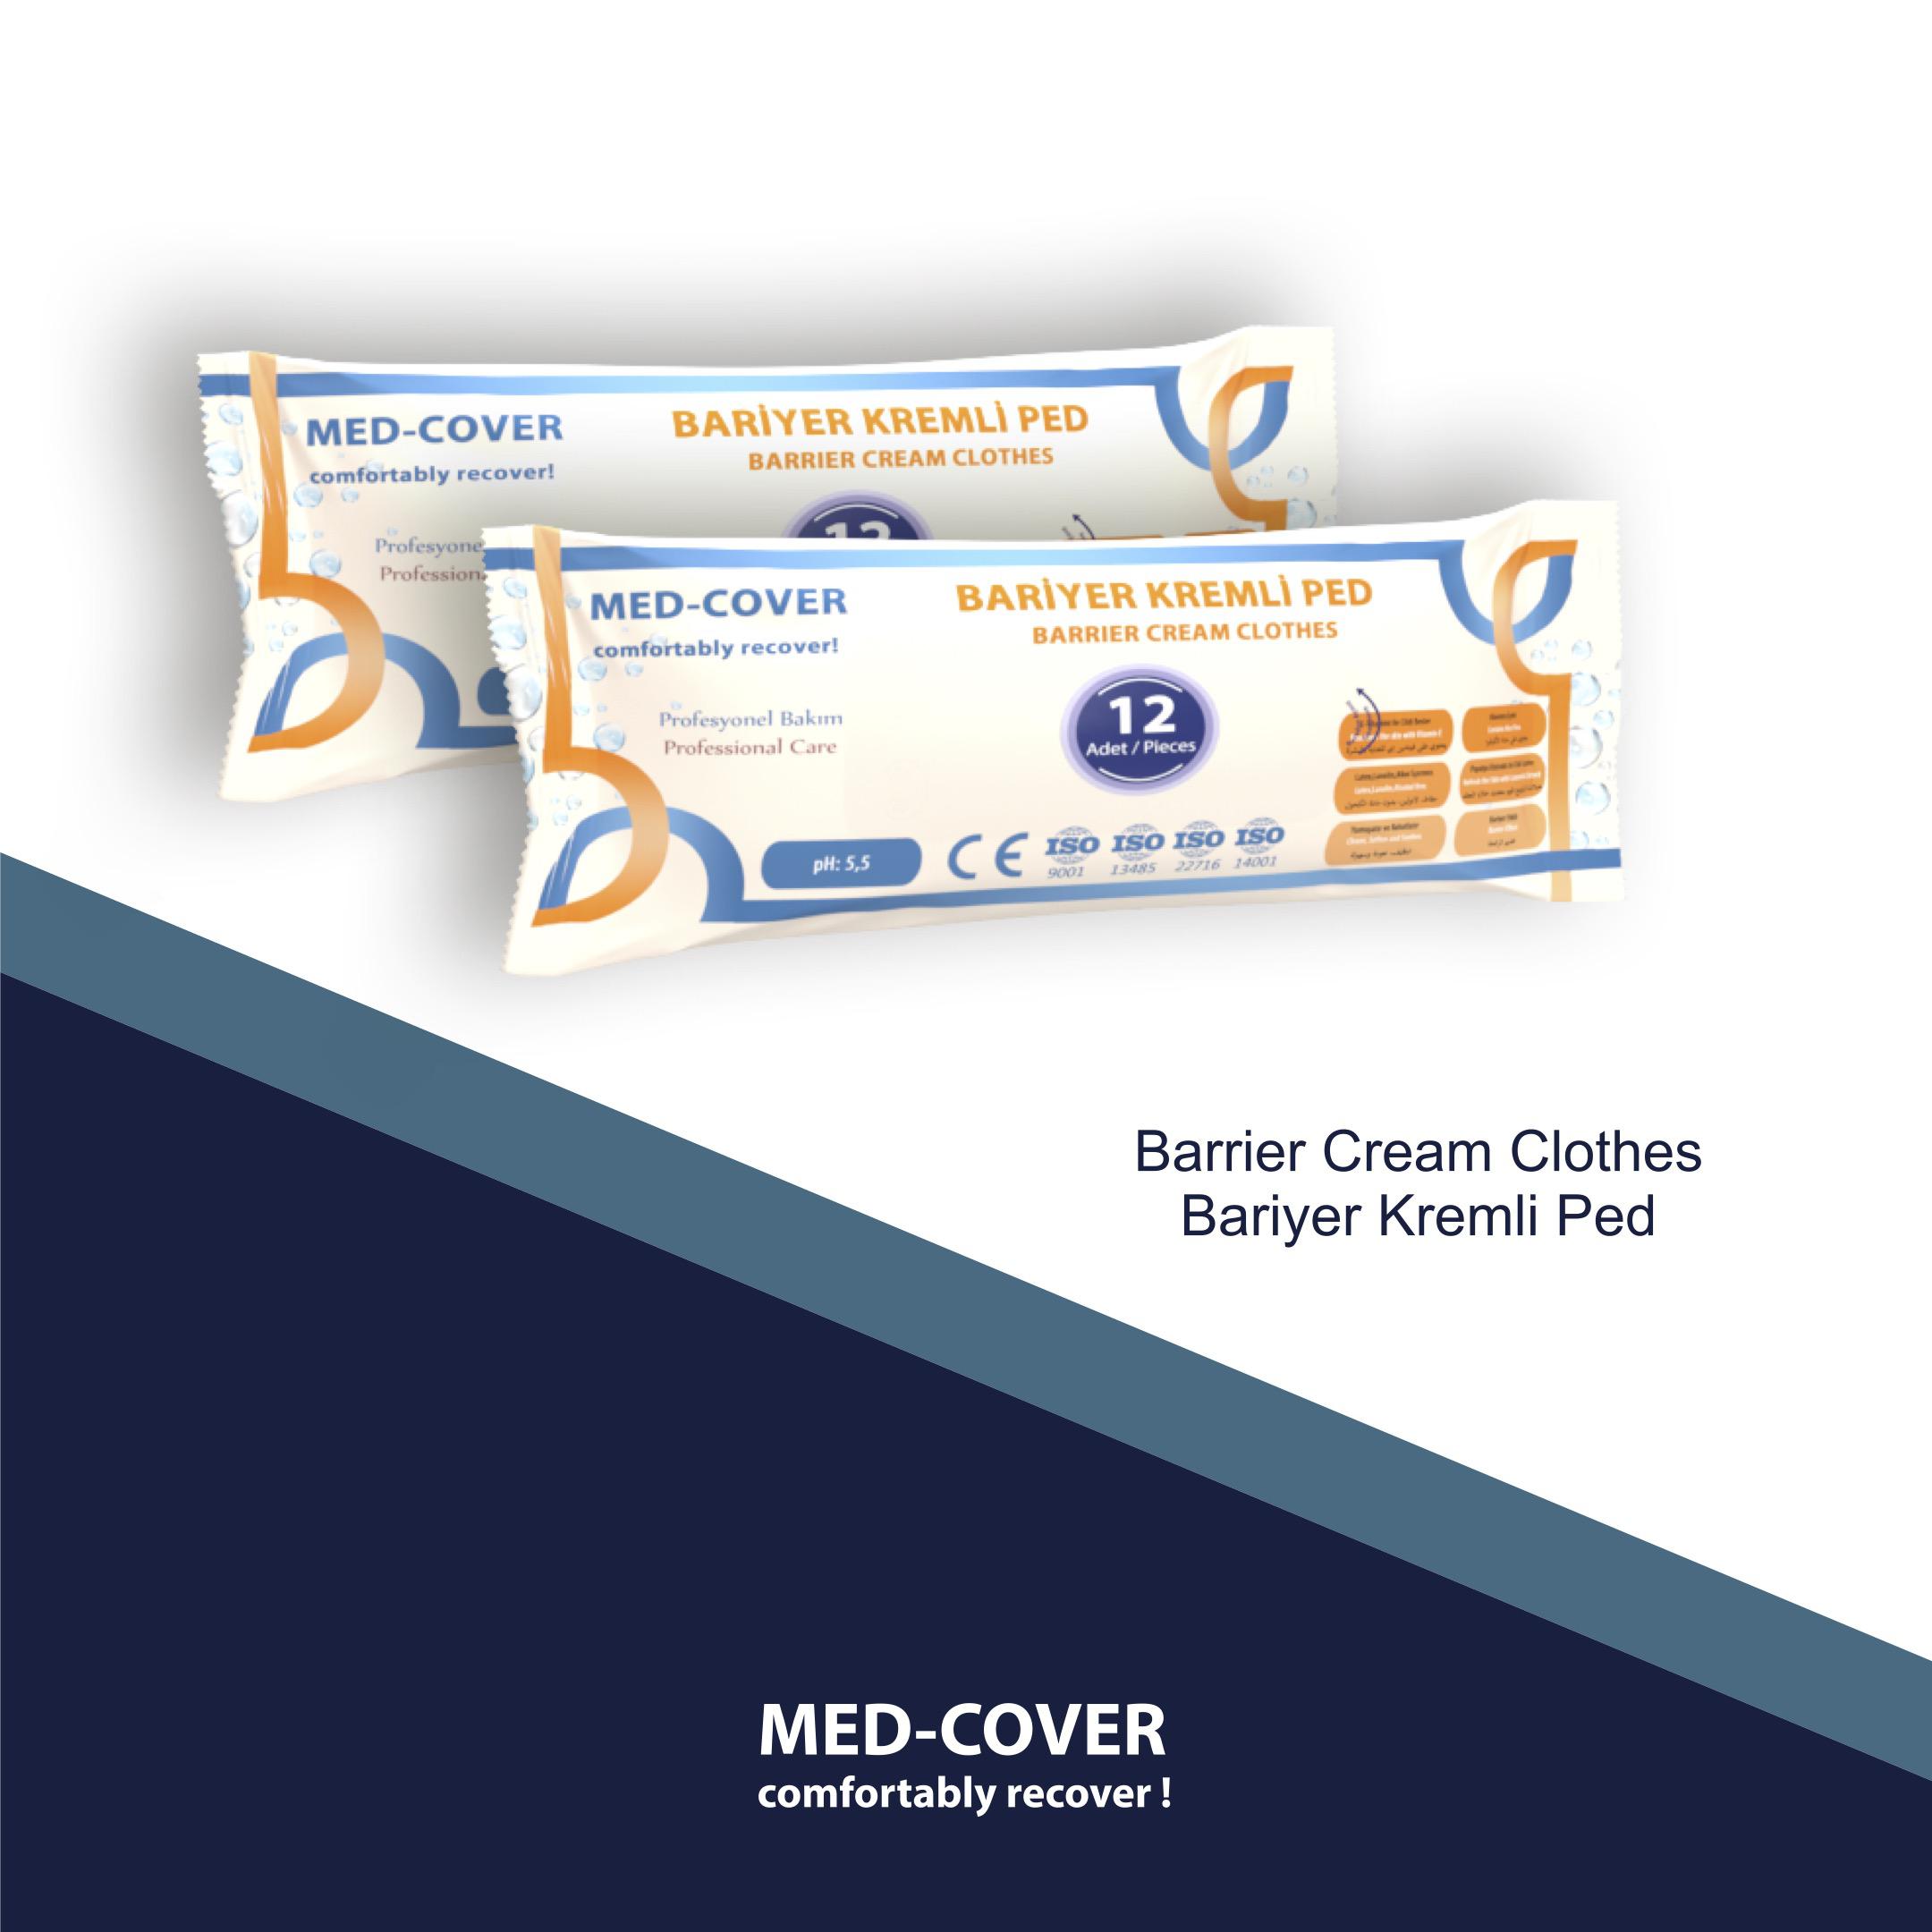 MED-COVER Barrier Cream Clothes